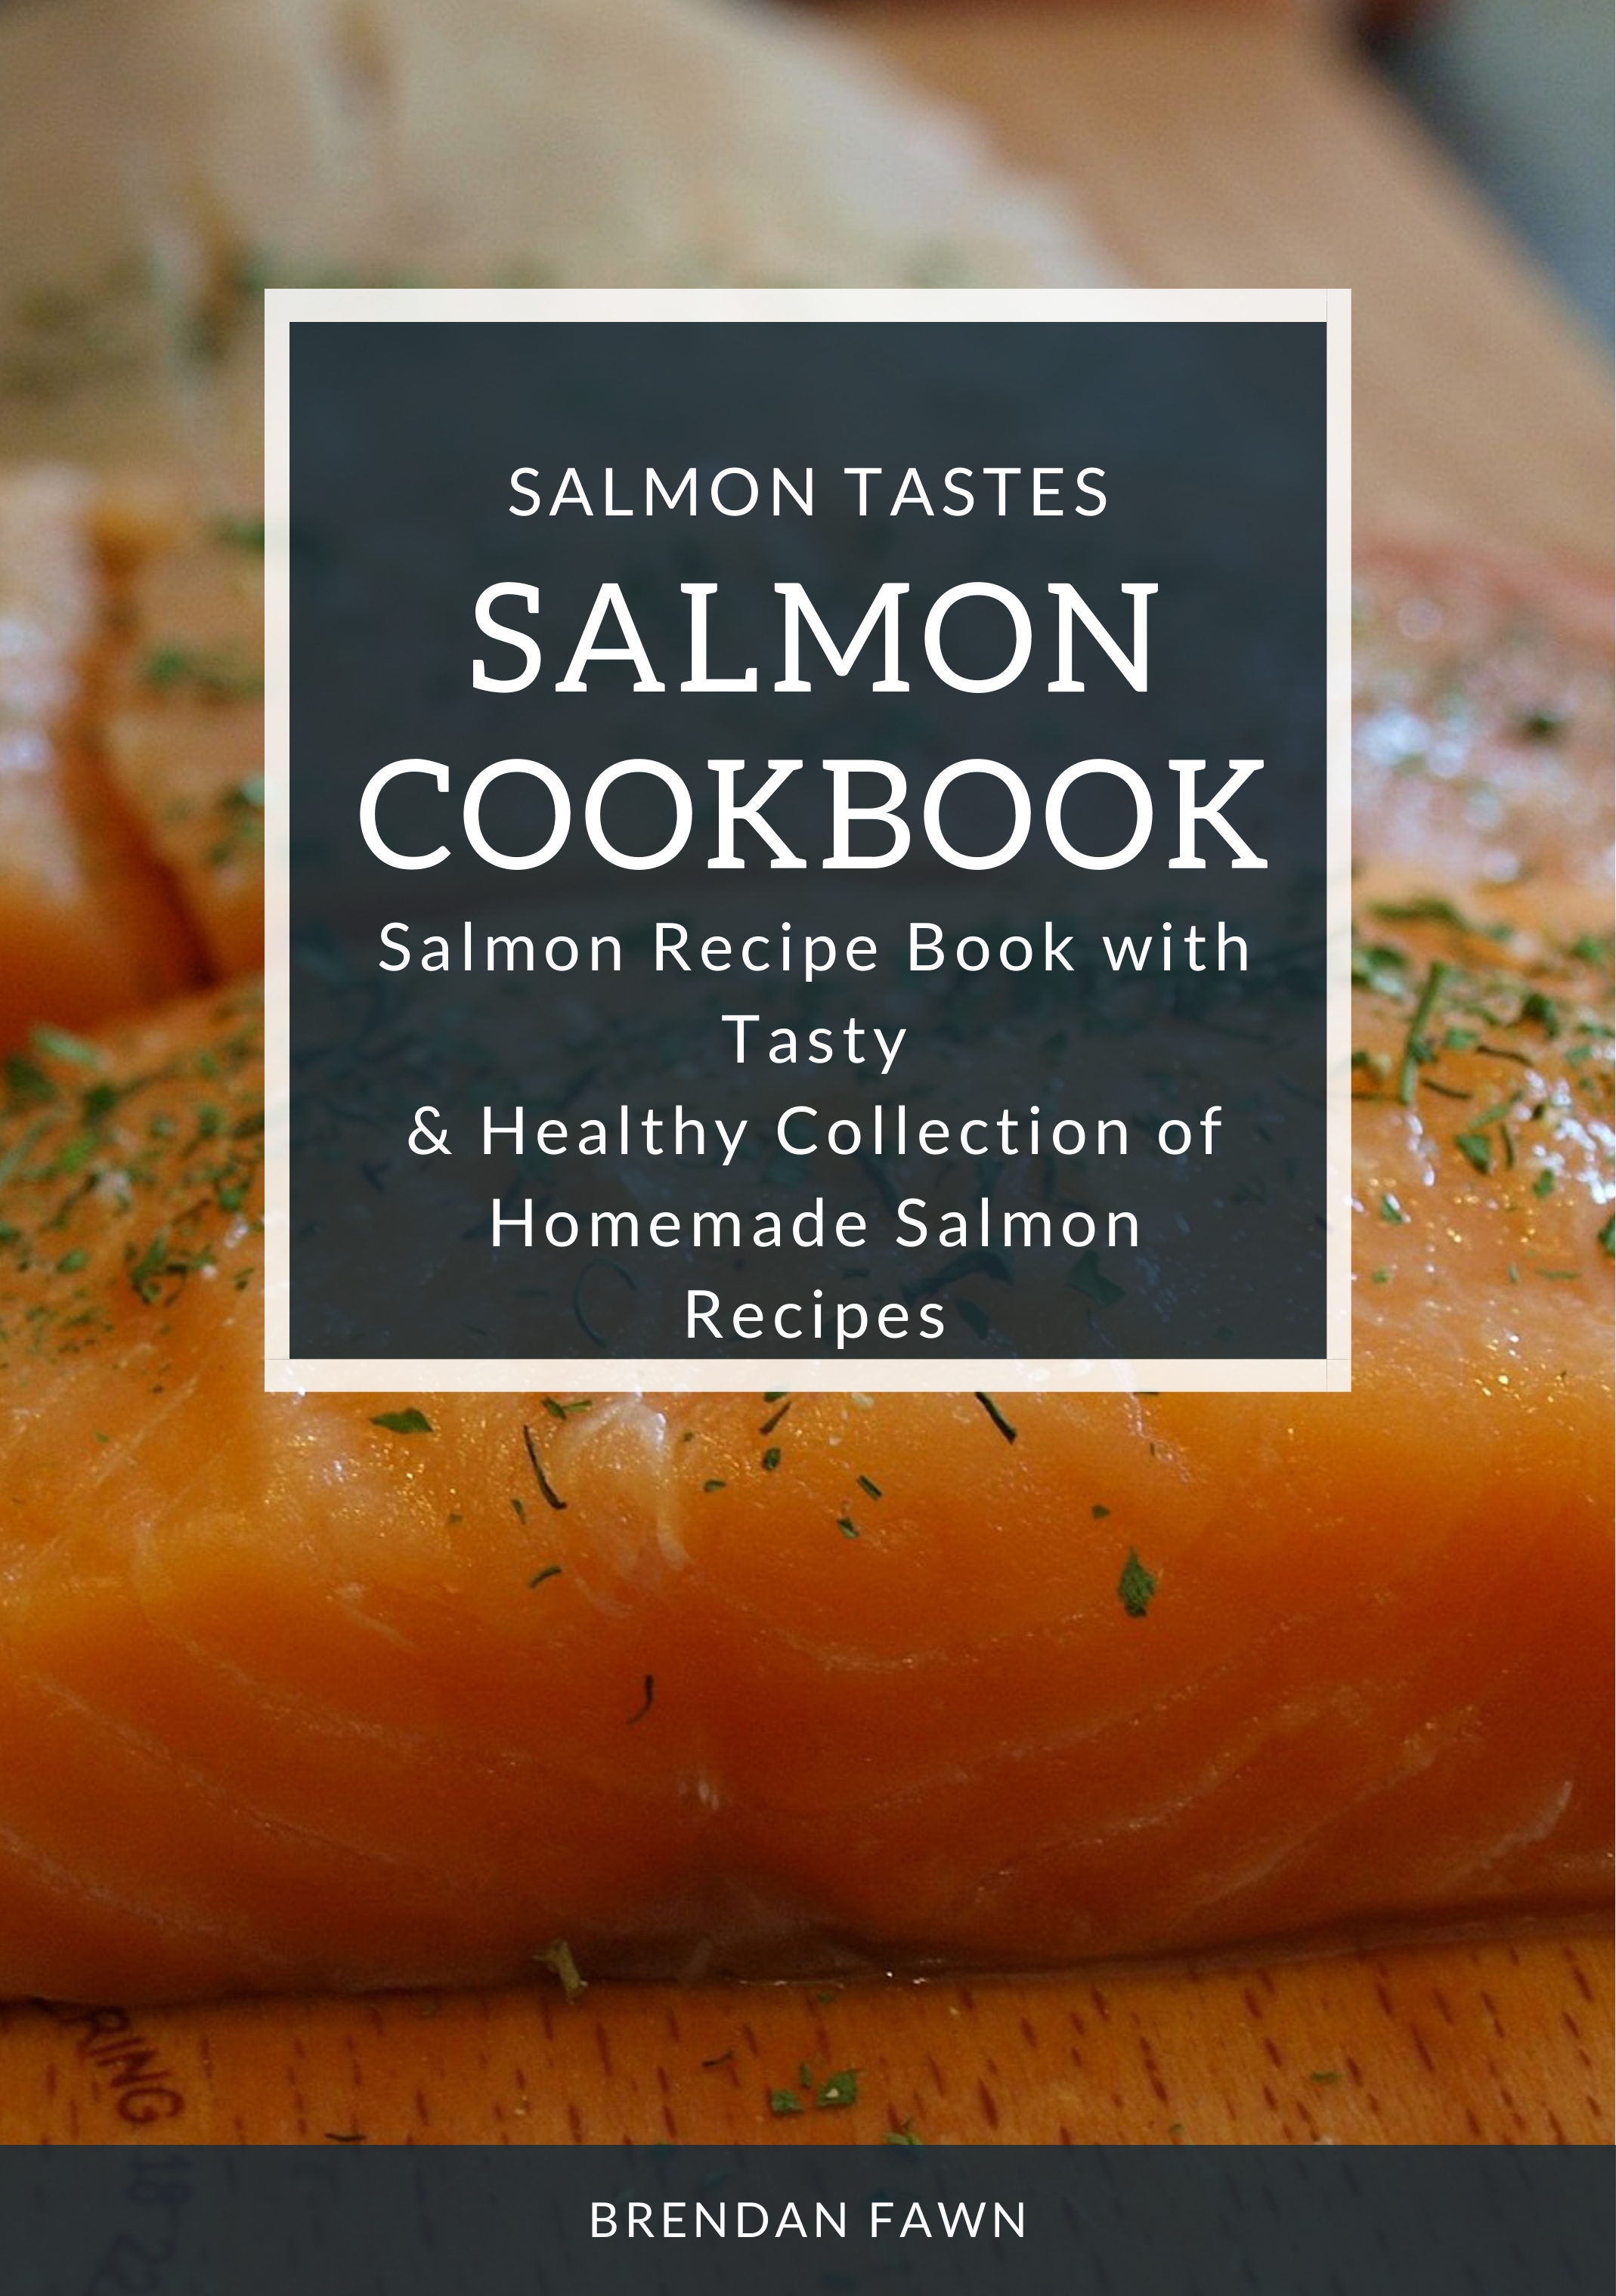 FREE: Salmon Cookbook: Salmon Recipe Book with Tasty & Healthy Collection of Homemade Salmon Recipes by Brendan Fawn